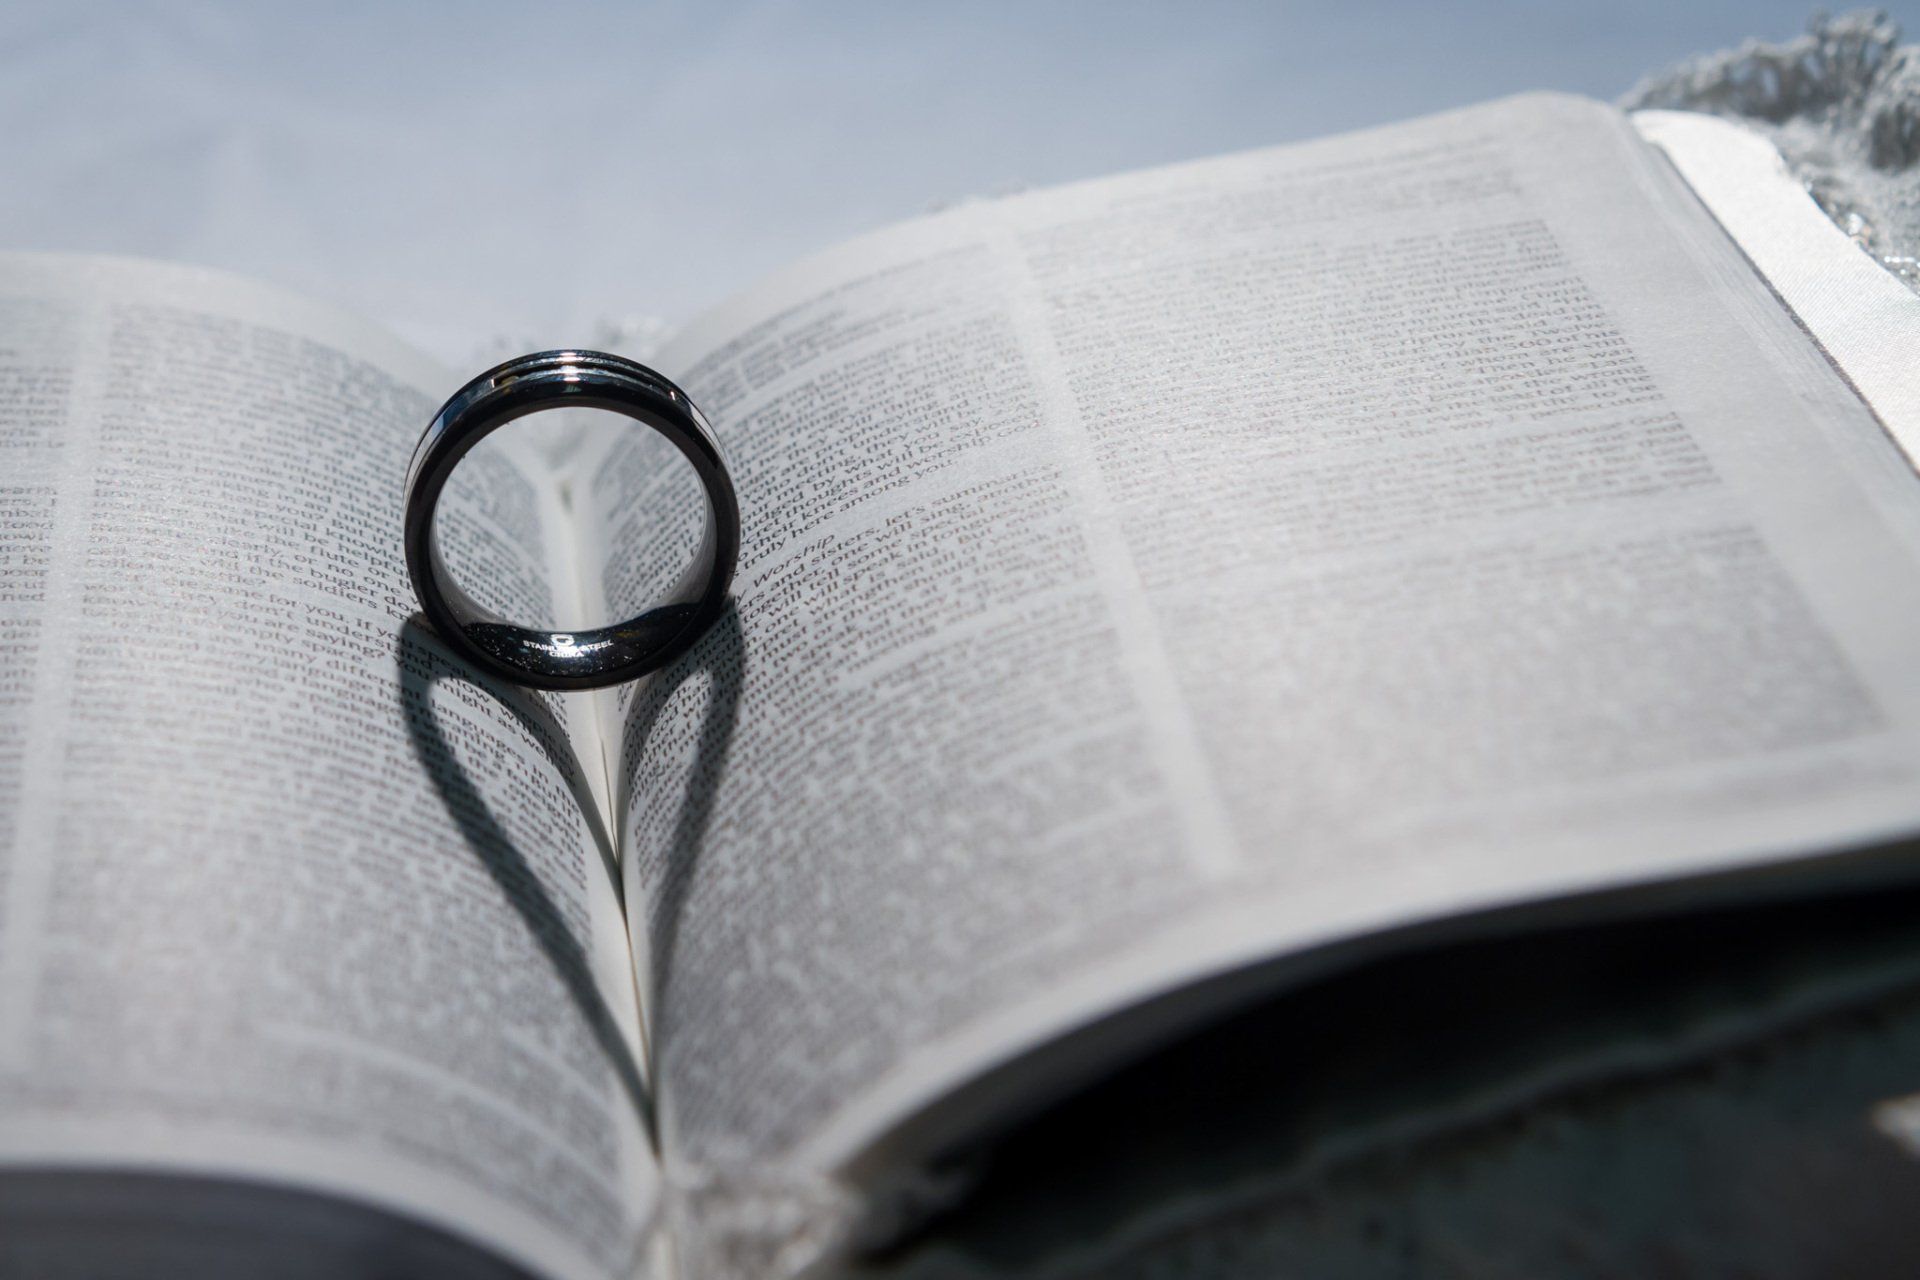 An image of a wedding ring sitting in a bible with the lighting causing a heart shadow